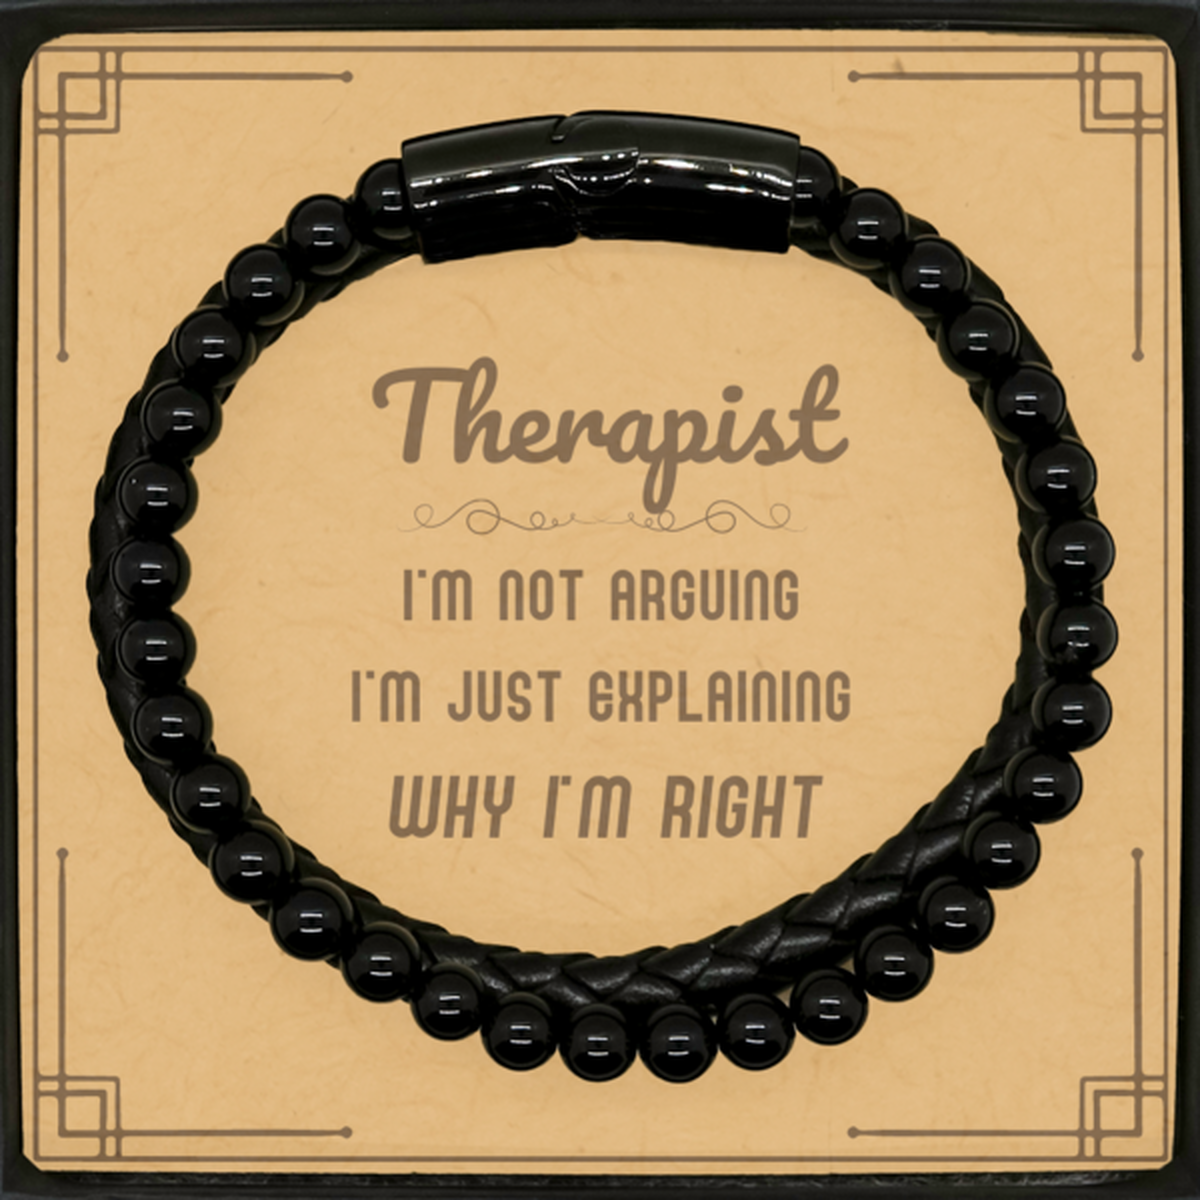 Therapist I'm not Arguing. I'm Just Explaining Why I'm RIGHT Stone Leather Bracelets, Funny Saying Quote Therapist Gifts For Therapist Message Card Graduation Birthday Christmas Gifts for Men Women Coworker